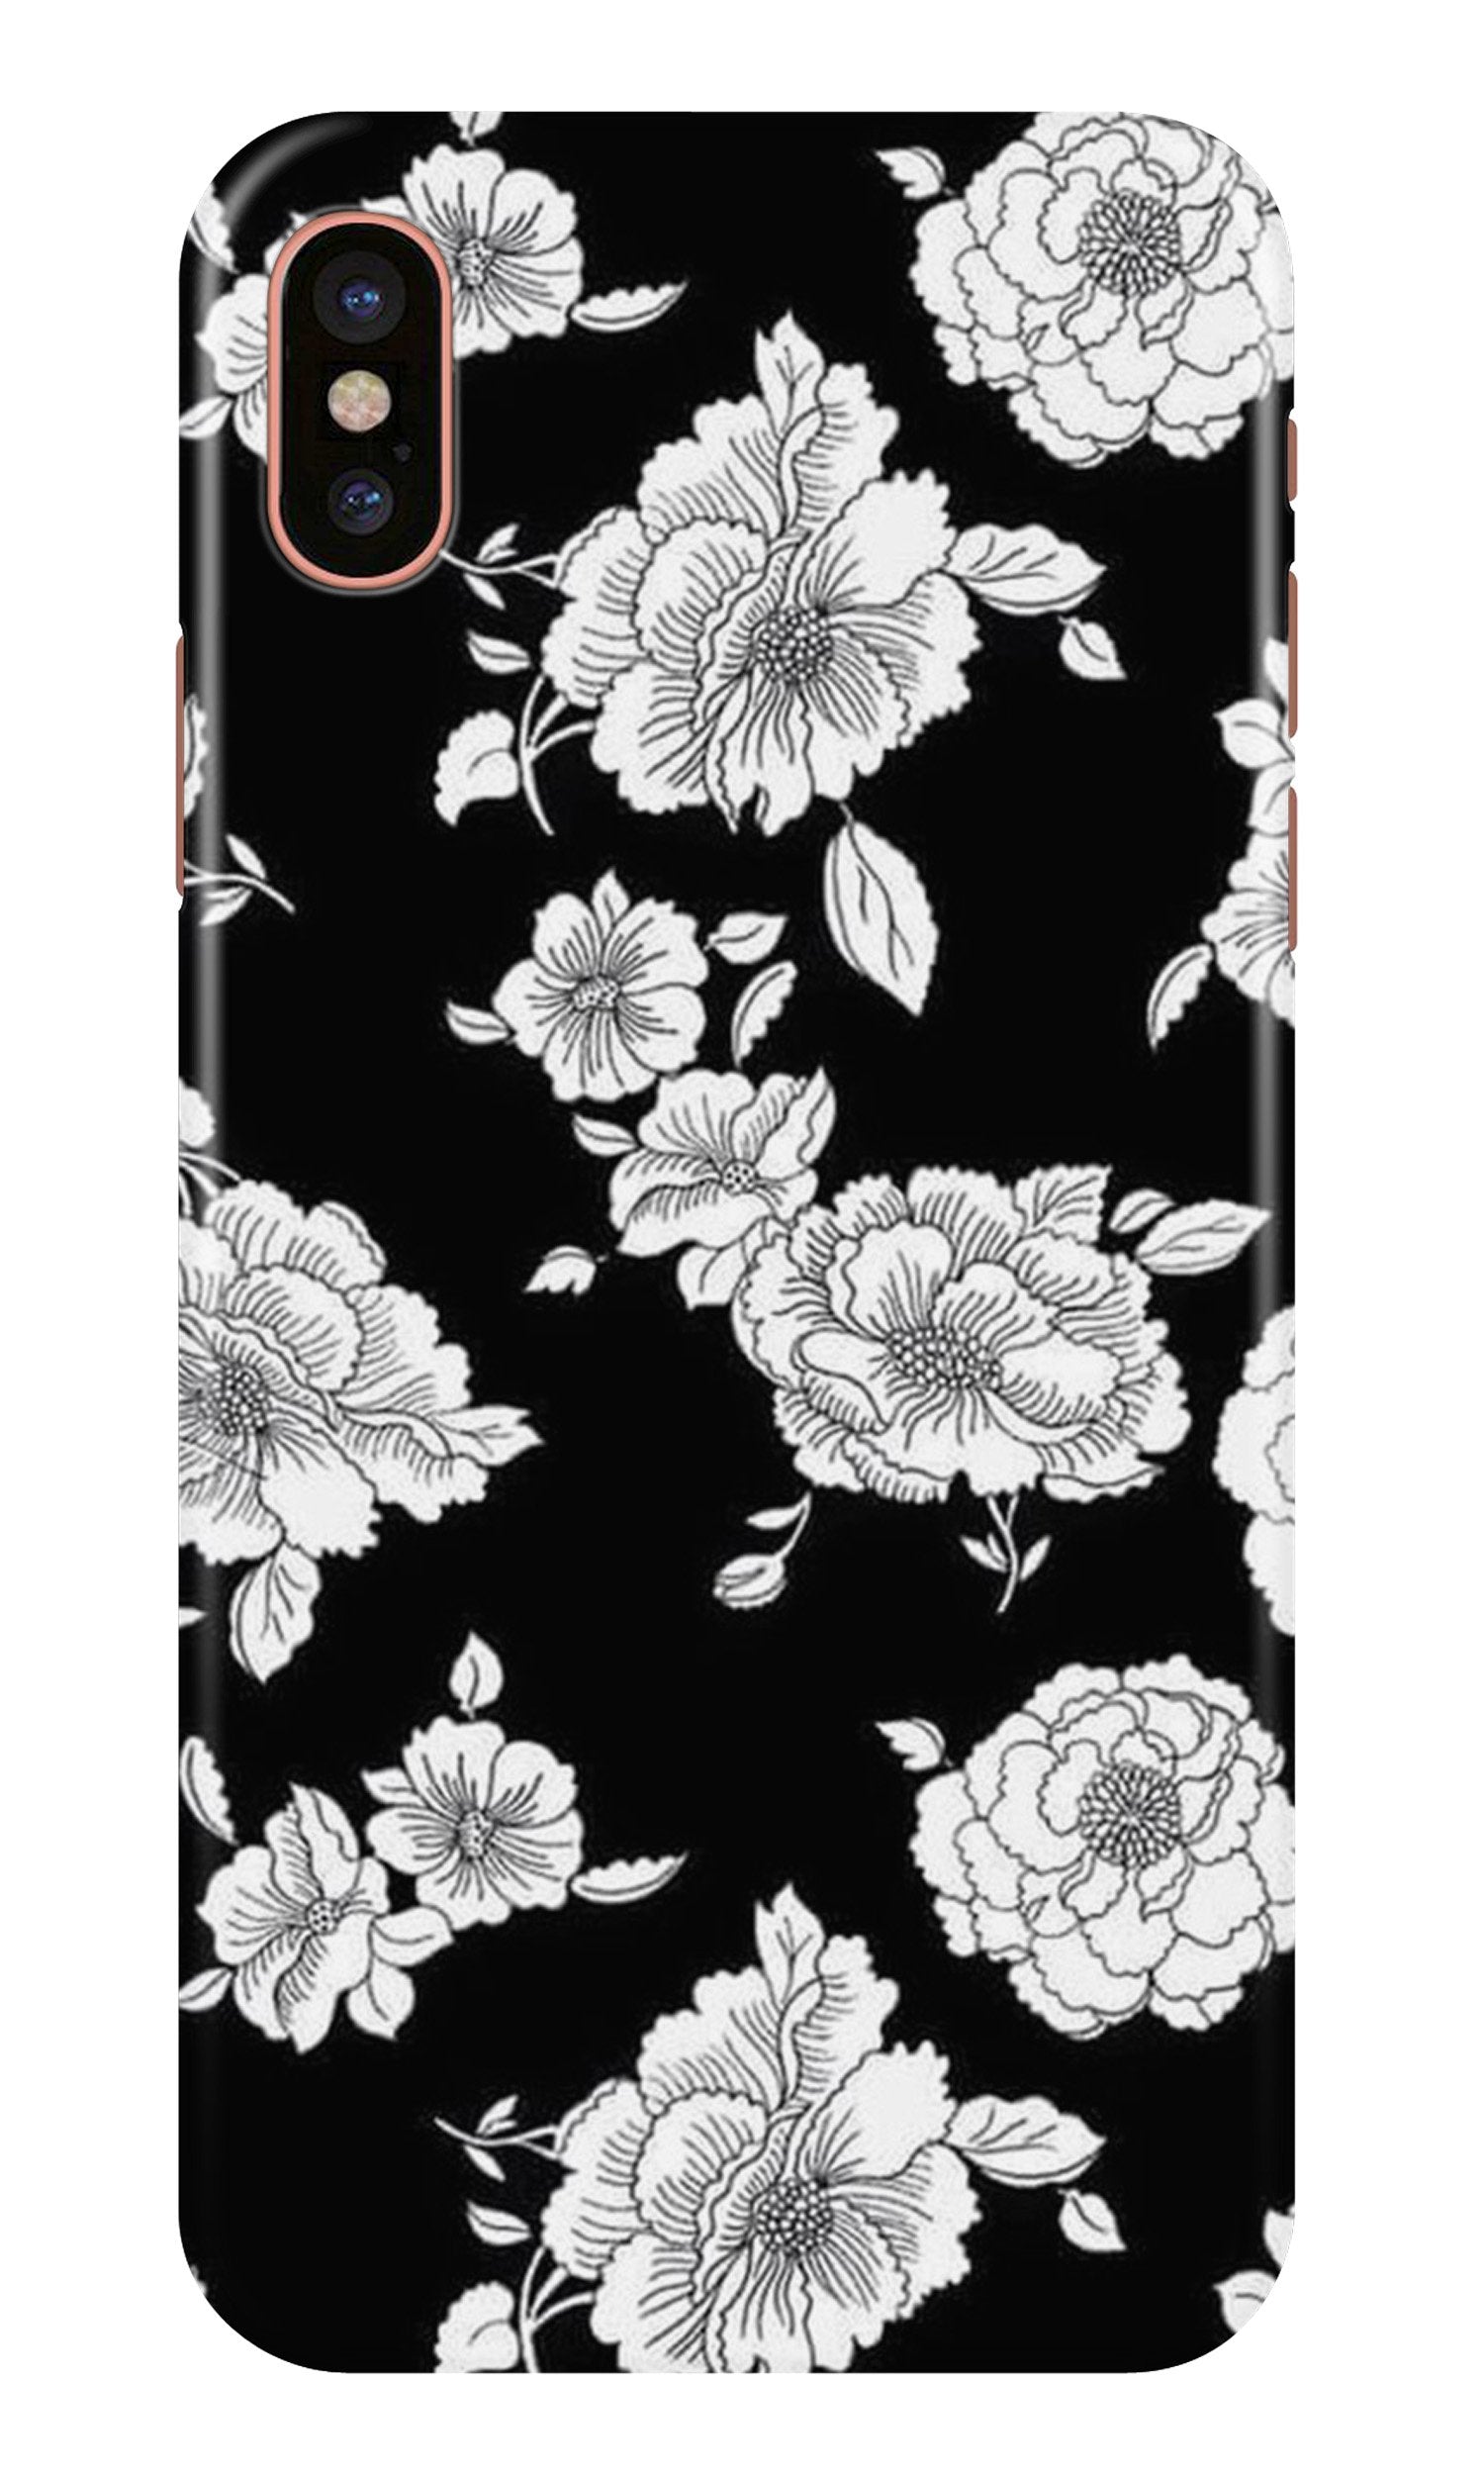 White flowers Black Background Case for iPhone Xr